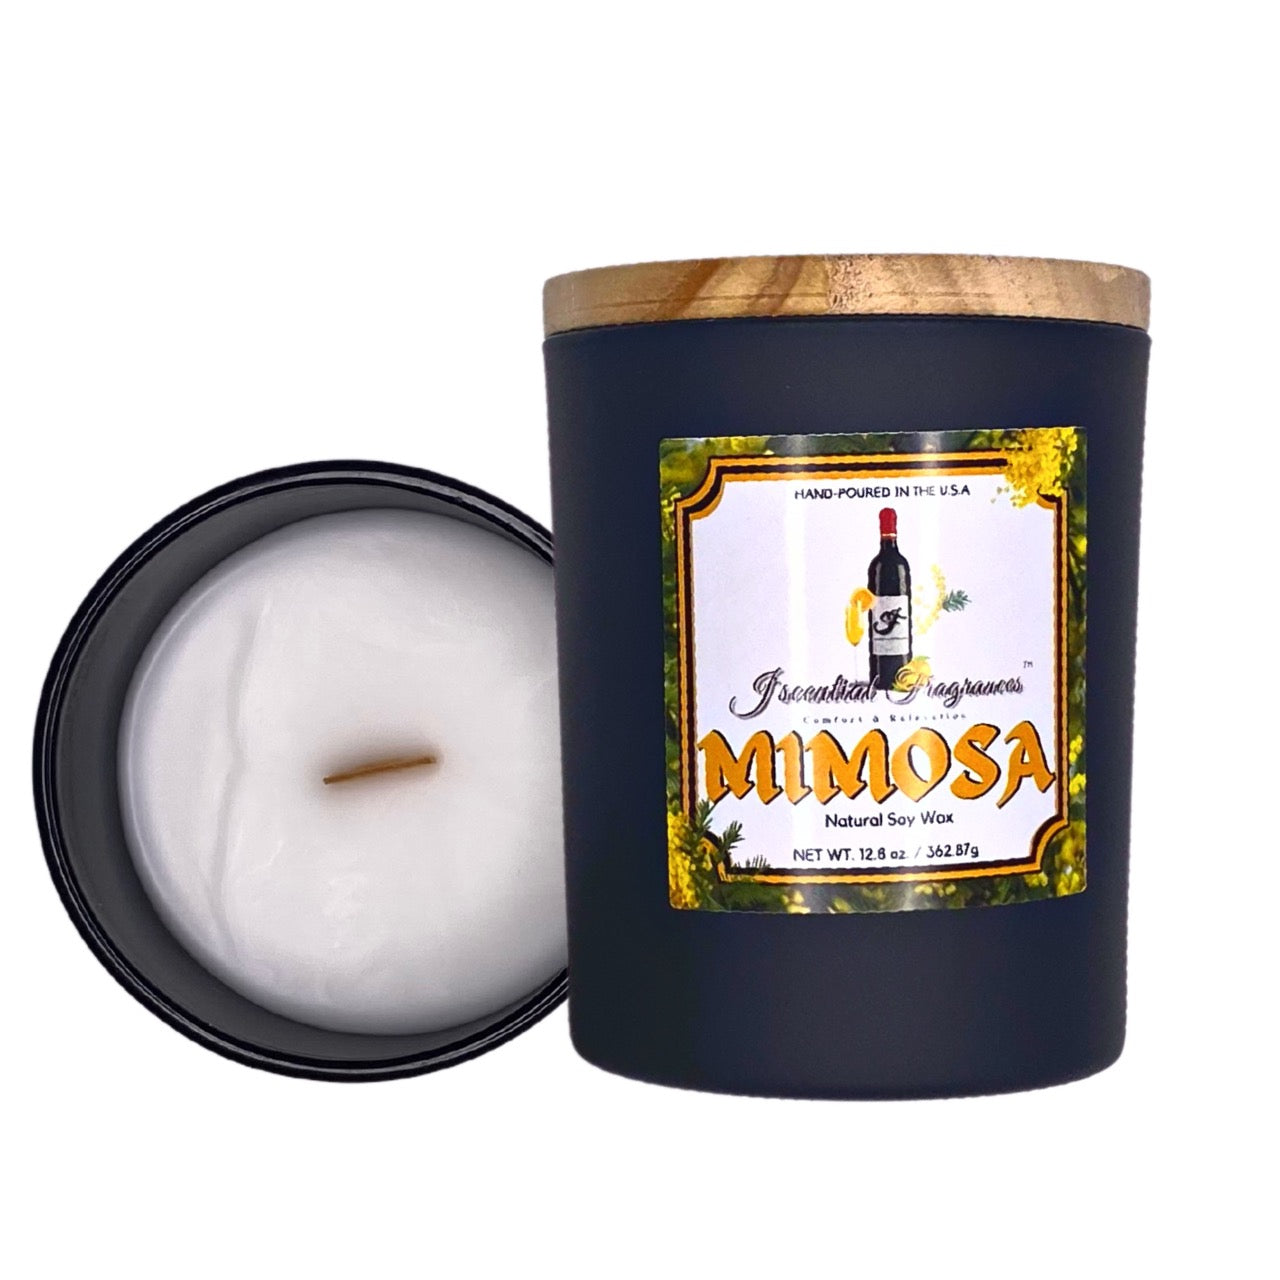 Mimosa (6oz. Candle)